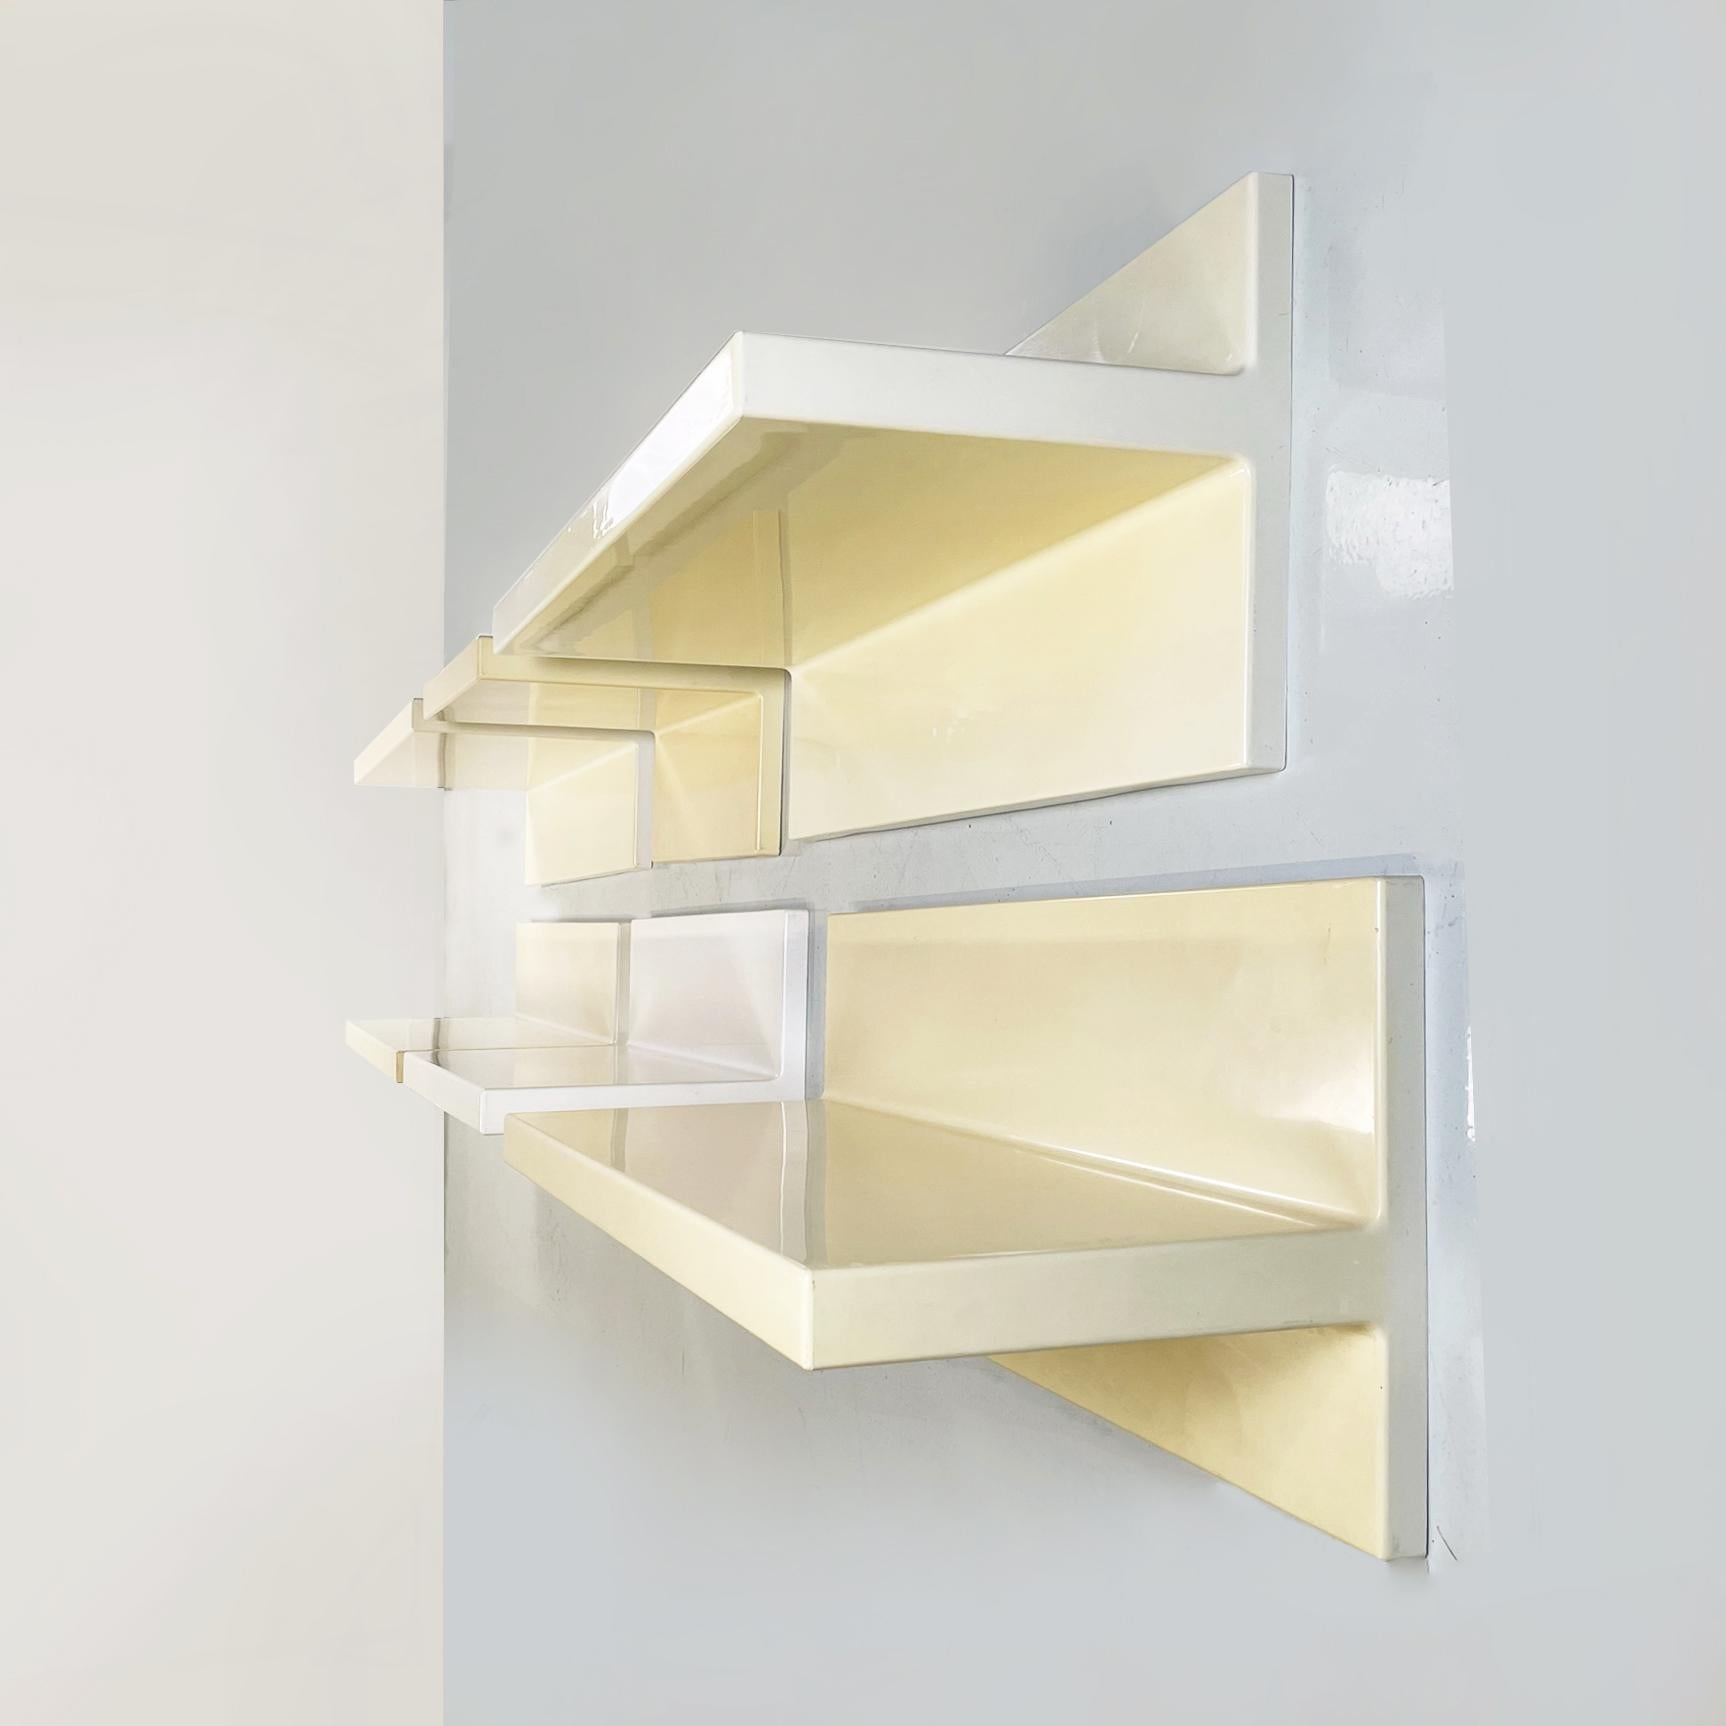 Italian modern cream white plastic shelves by Marcello Siard for Kartell, 1970s. 
Set of six shelves with asymmetrical profile in plastic in colors ranging from white to cream, as the surface has taken on light in an uneven way over the years. They